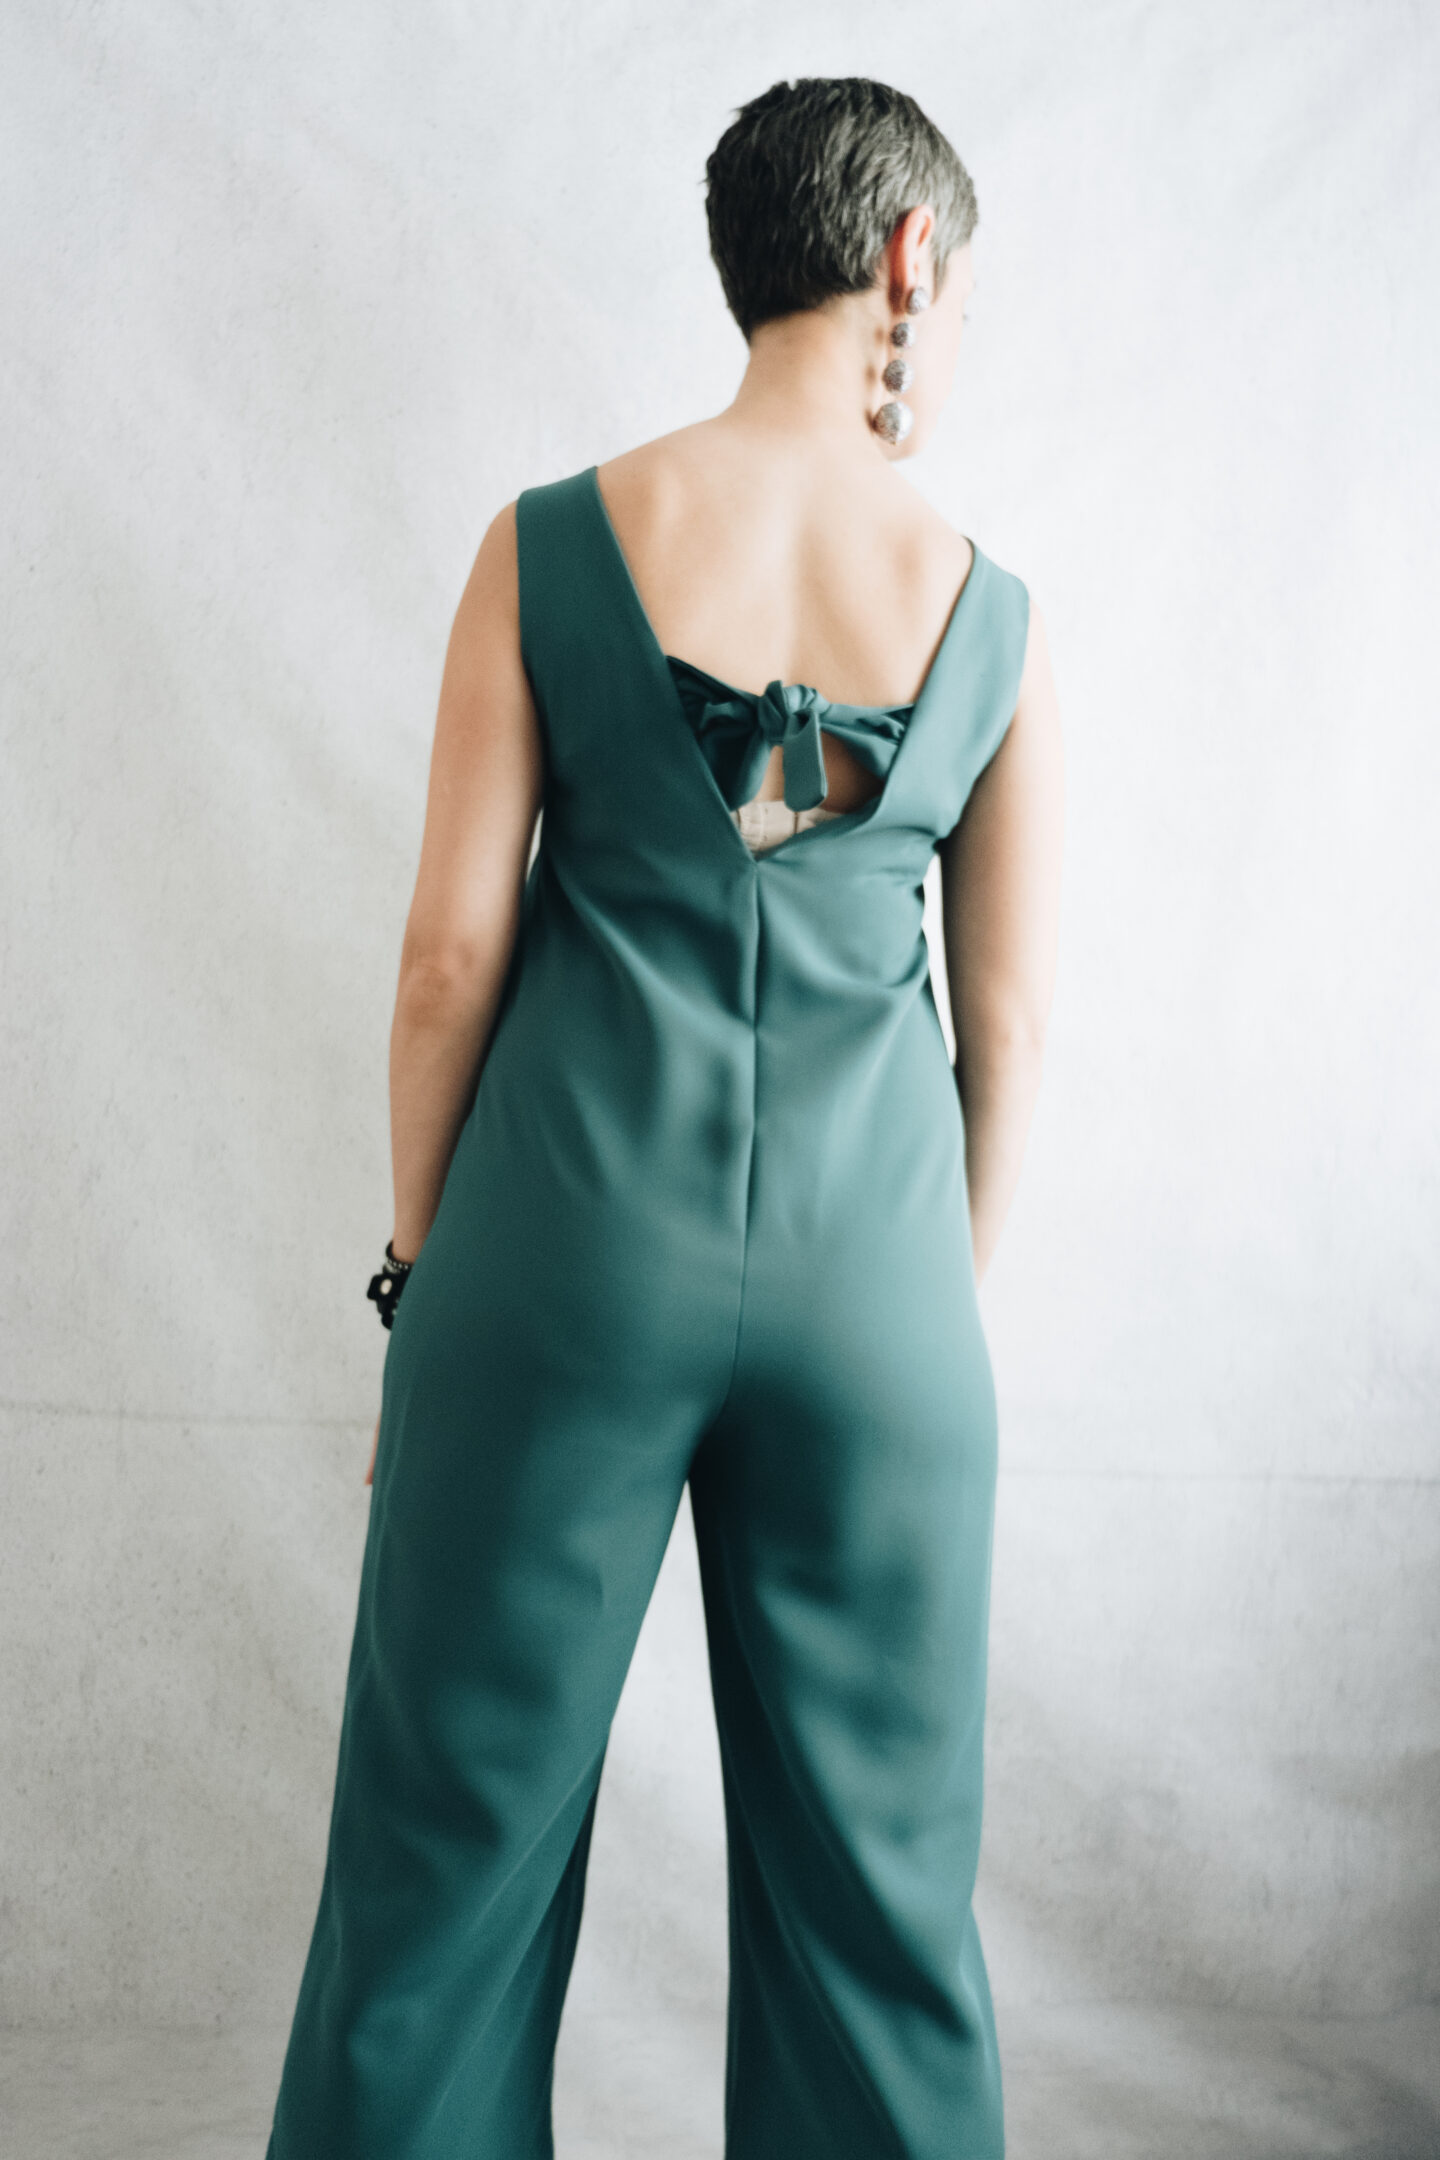 DIY Emerald fitted jumpsuit, with v-neck back and front neckline, front zipper and tie back.
Sewing pattern: Fibre Mood Danika